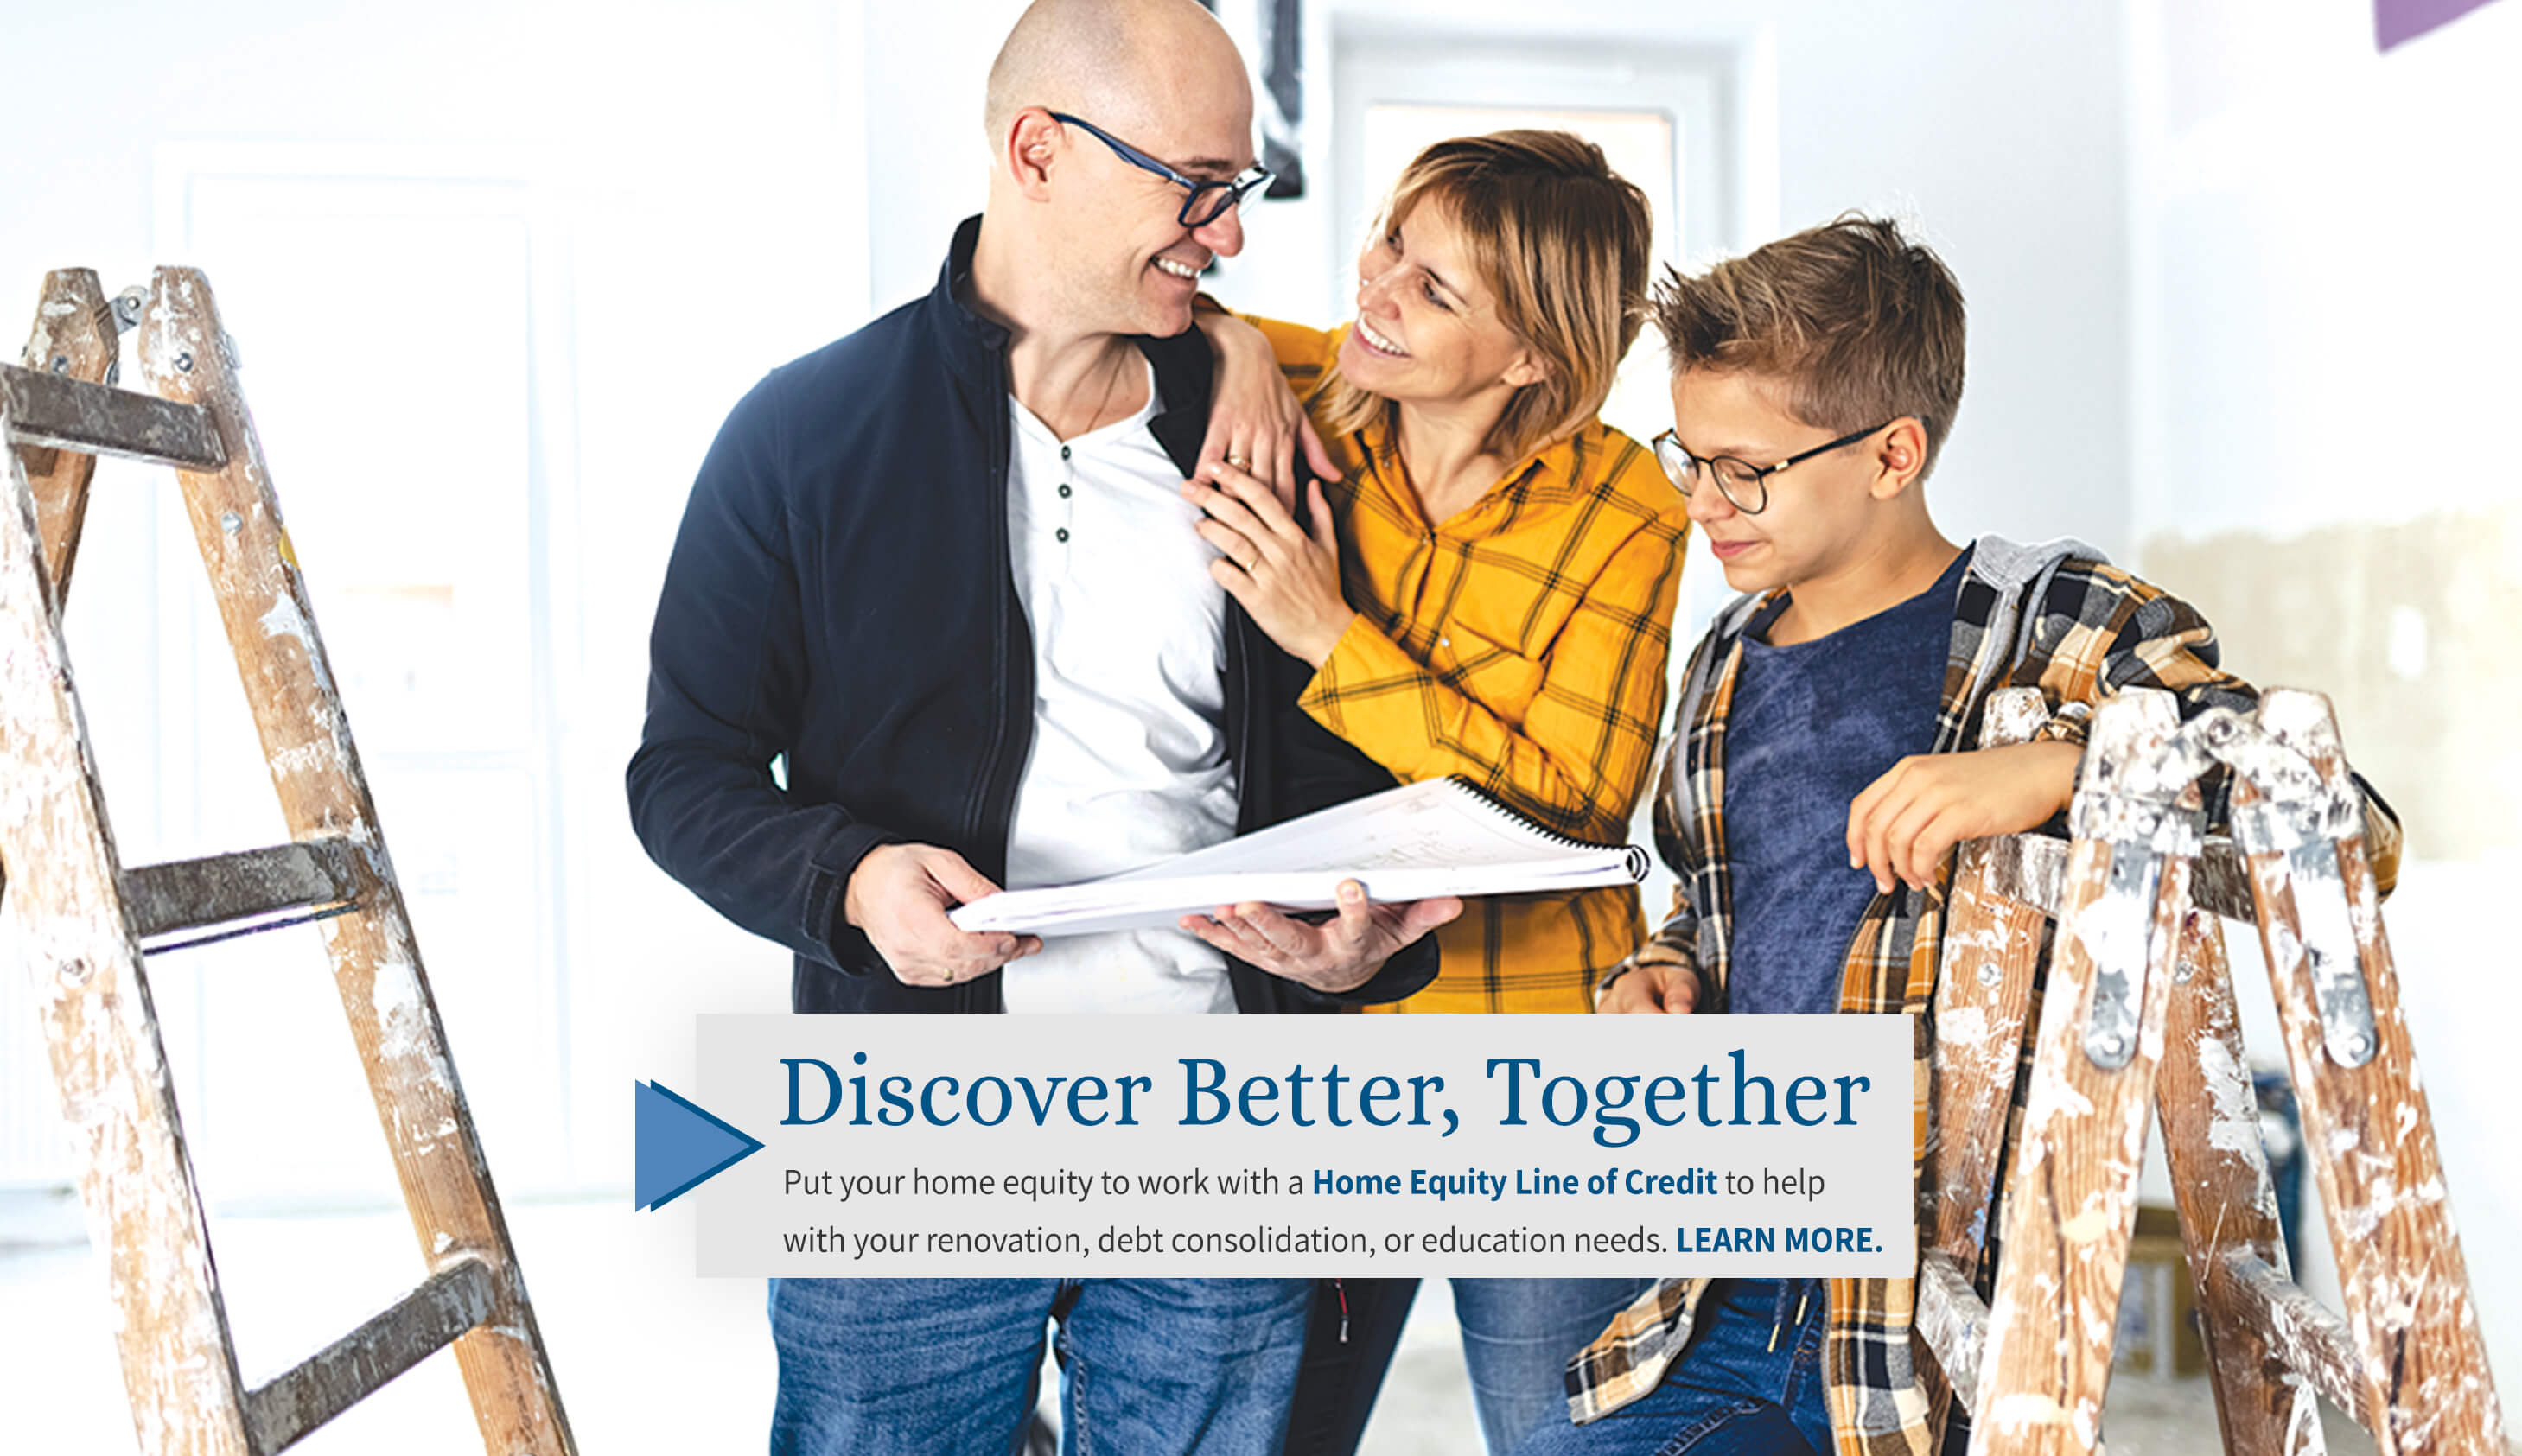 discover better, together put your home equity to work with a home equity line of credit to help with your renovation, debt consolidation, or education needs. learn more.